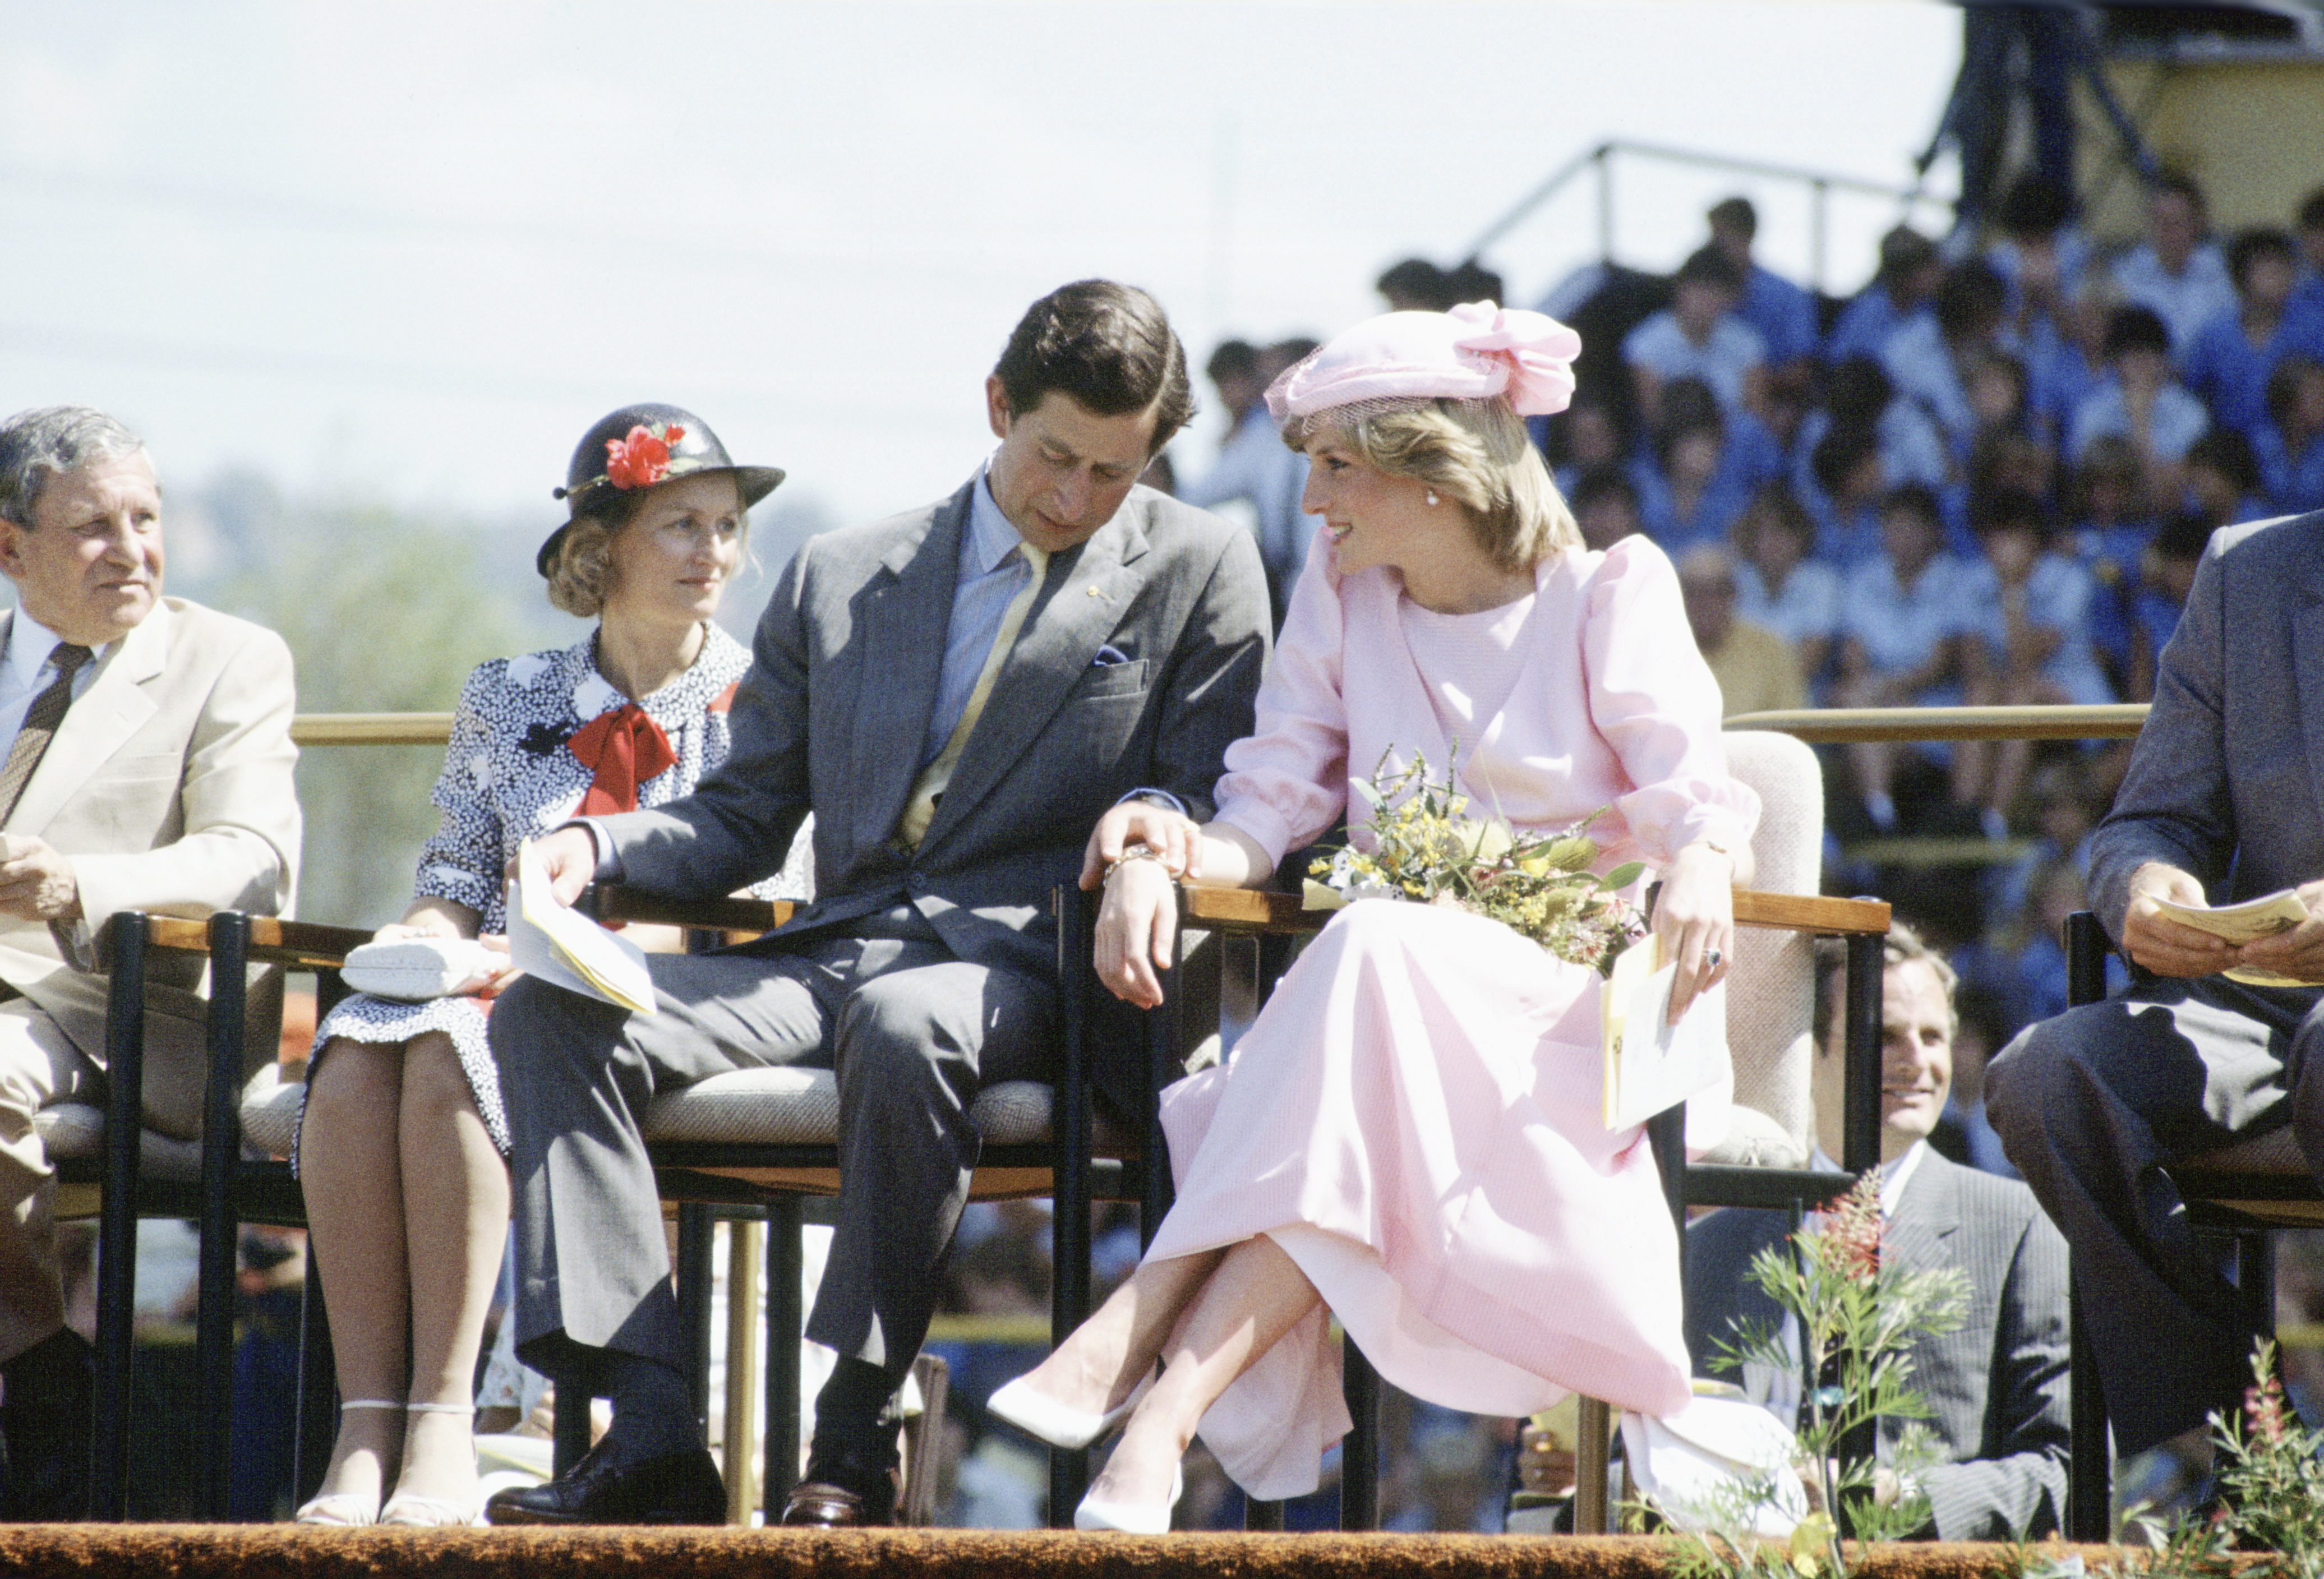 Prince Charles, and Princess Diana visit Australia, At Maitland, New South Wales on March 29, 1983. | Source: Getty Images